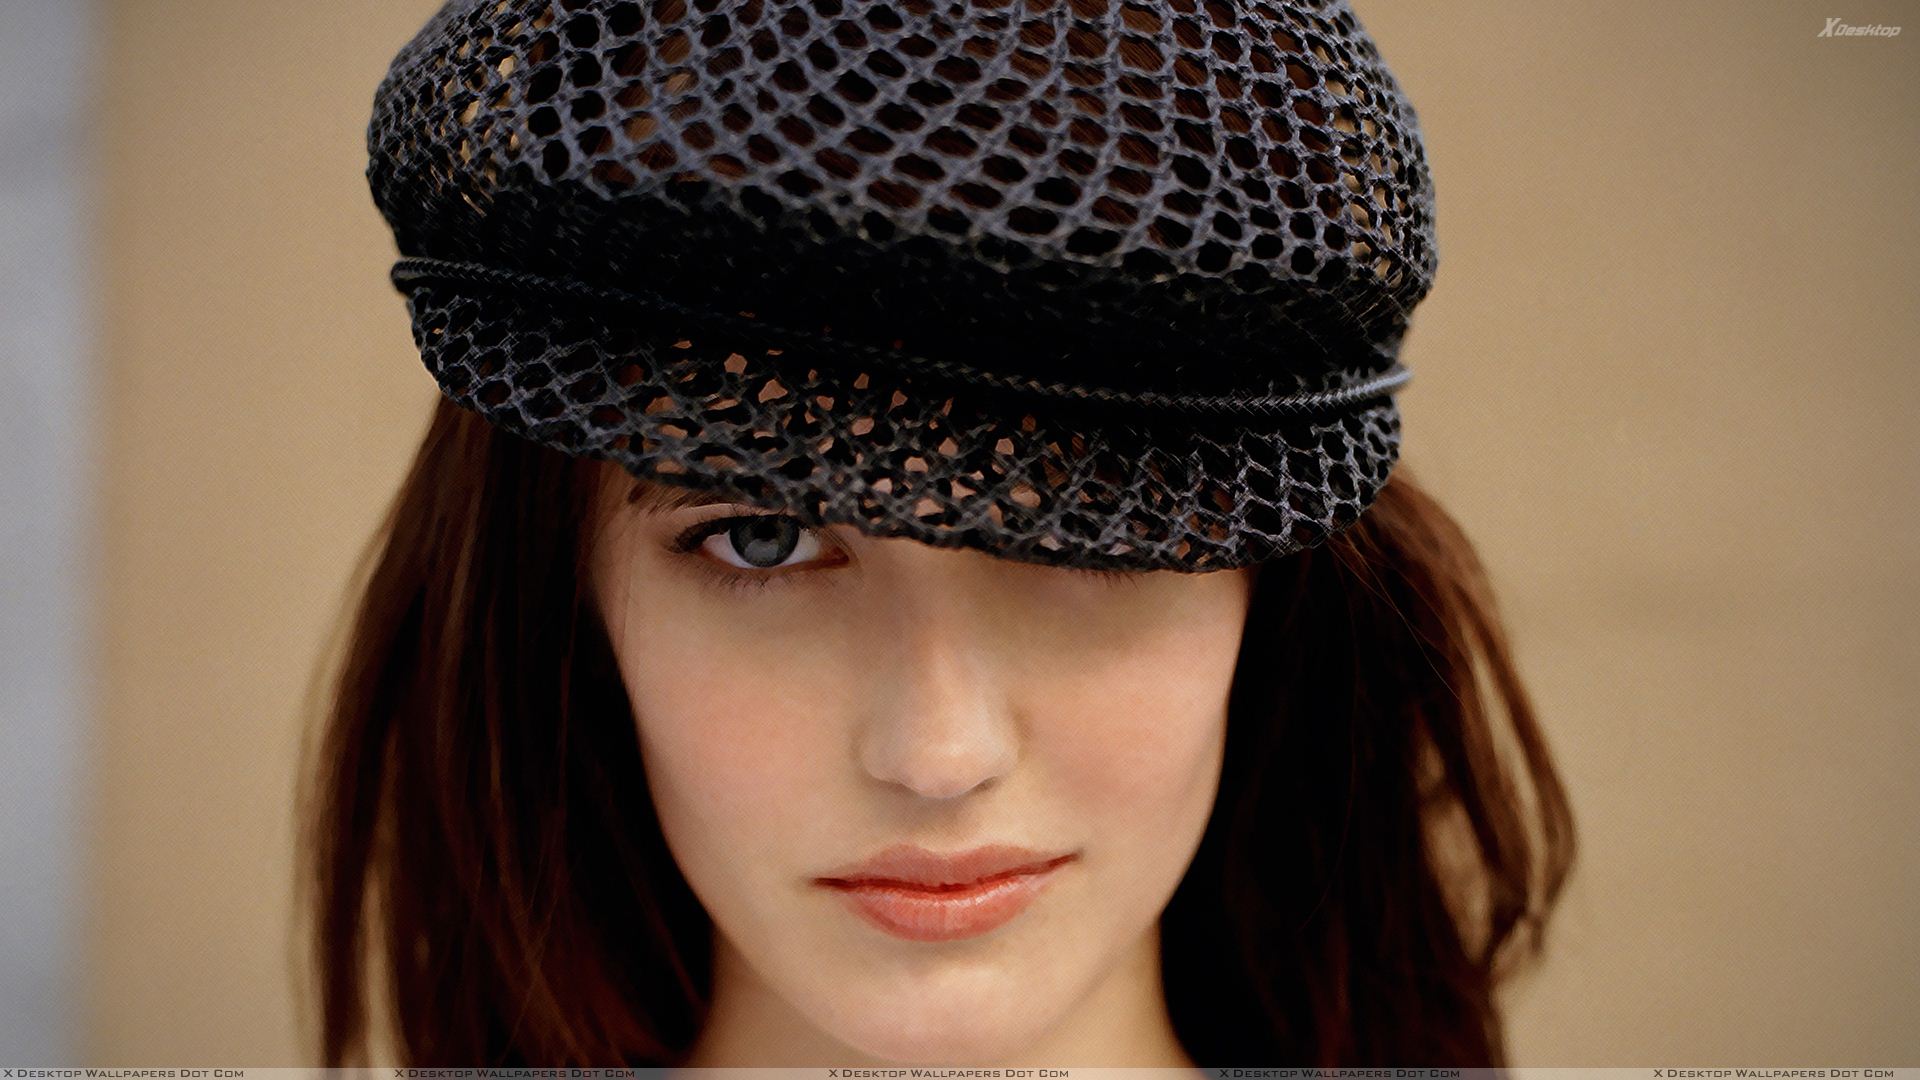 Eva Green Wallpapers, Photos & Images in HD